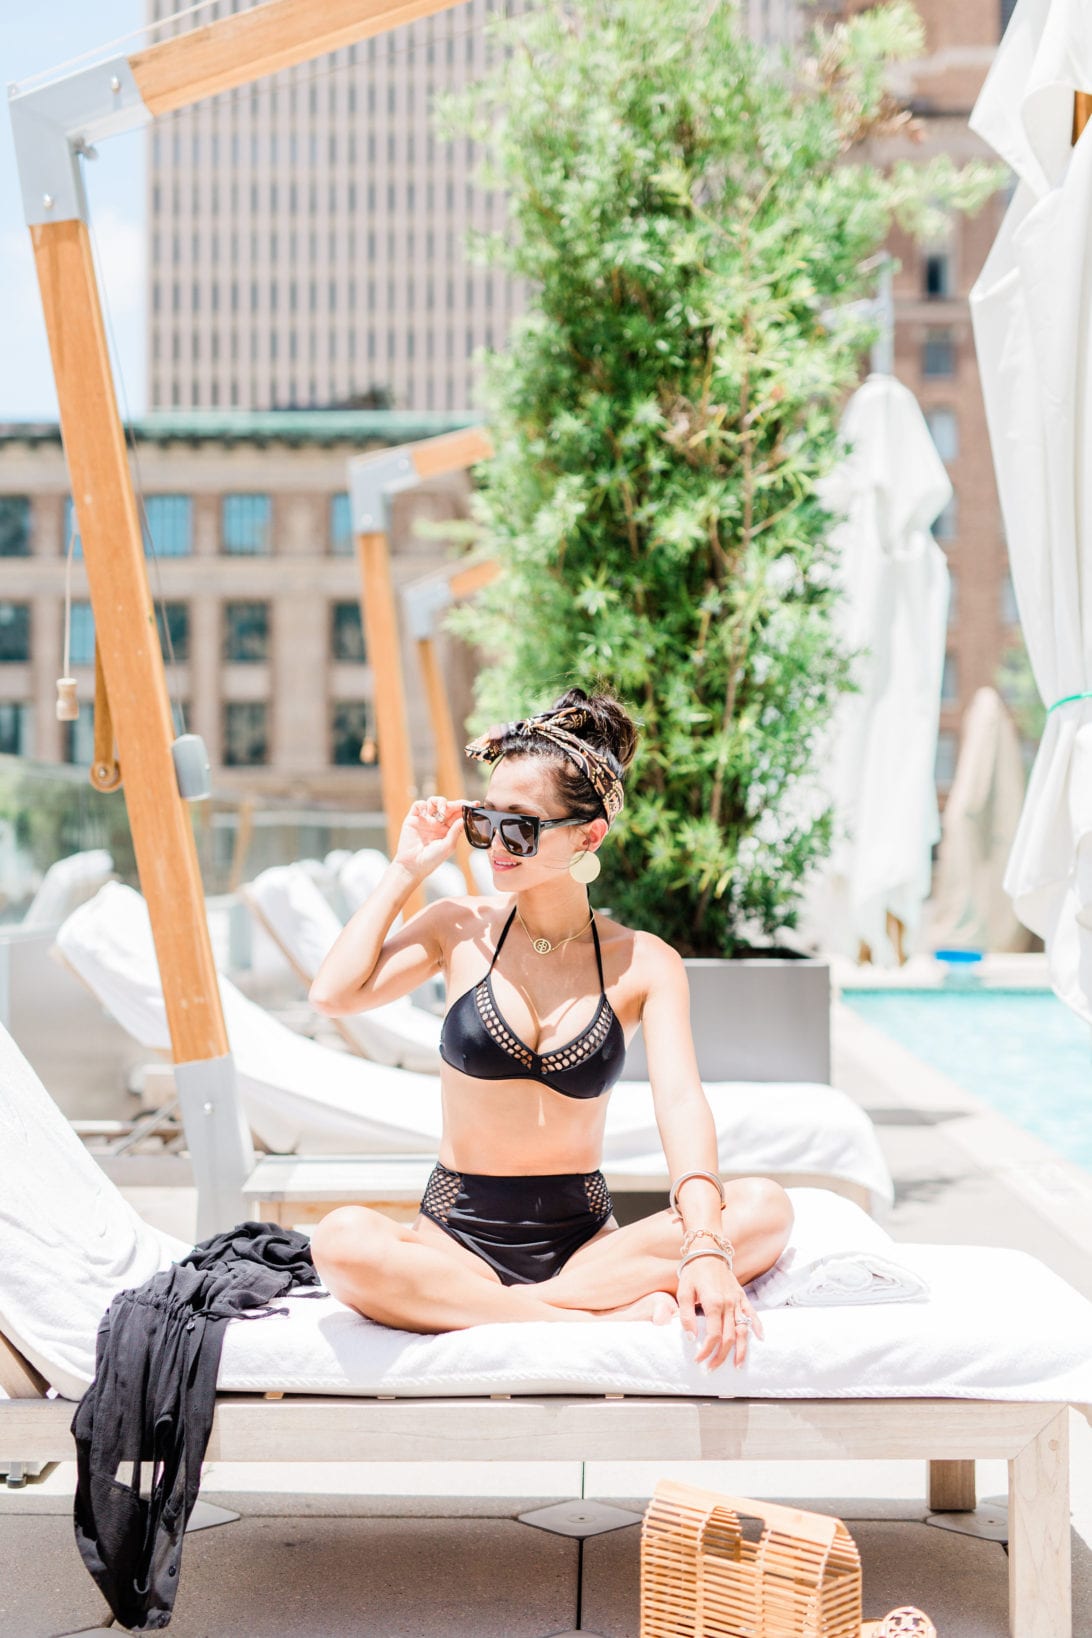 How to Style the Louis Vuitton Bandeau for Summer 